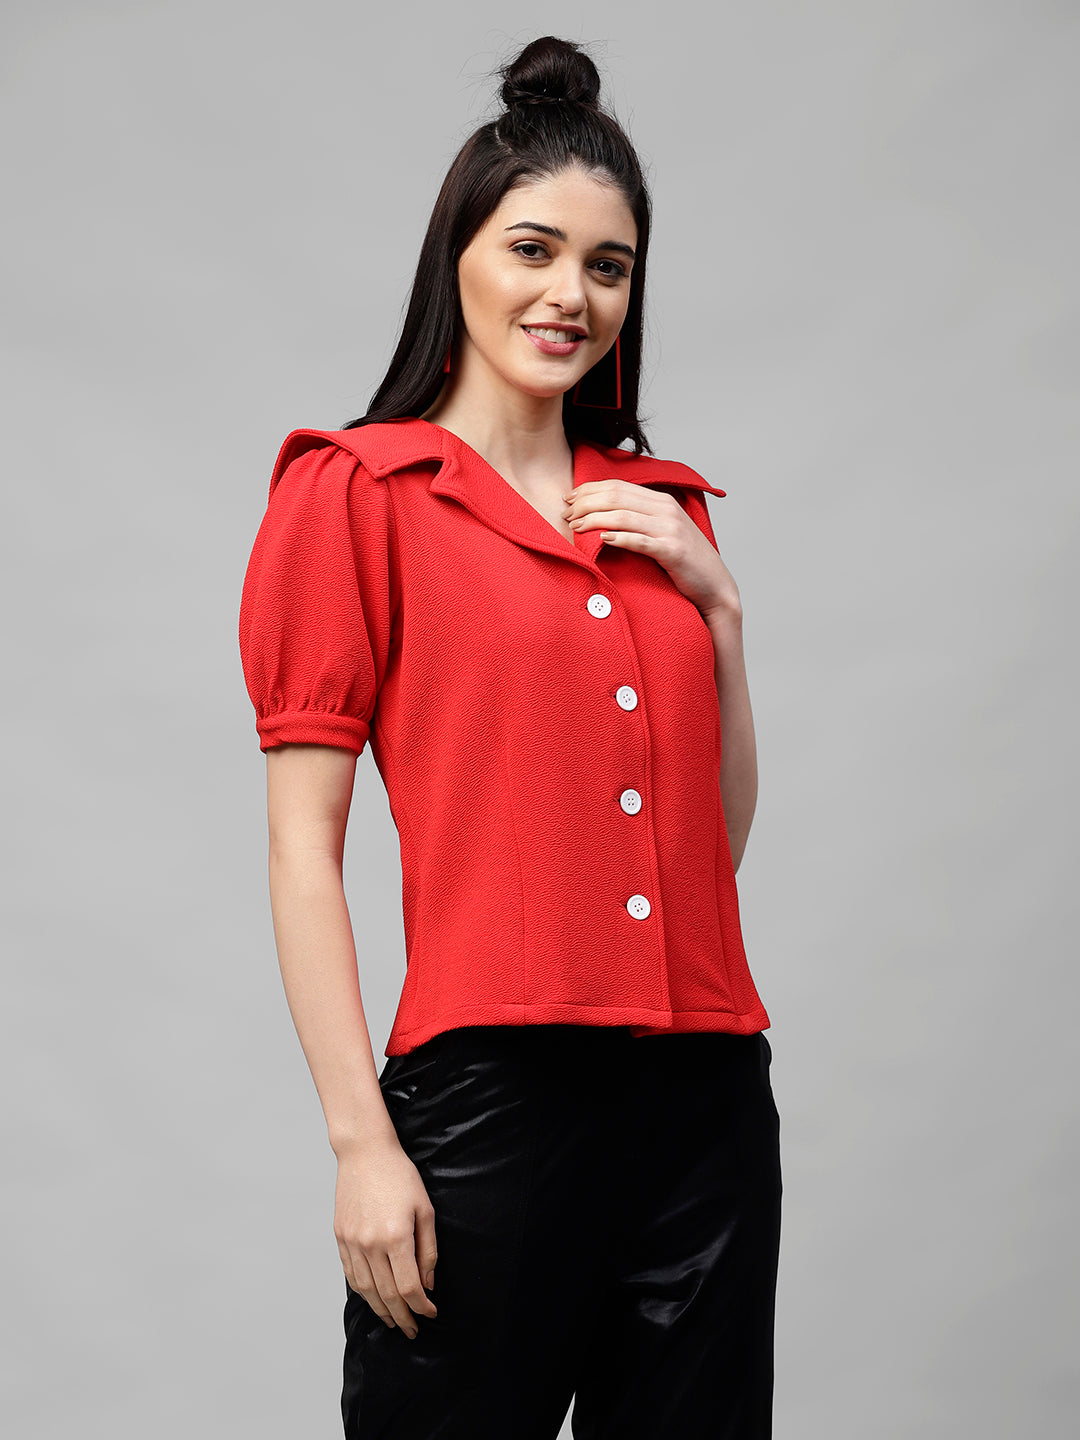 Athena Women Red Solid Shirt Style Top - Athena Lifestyle